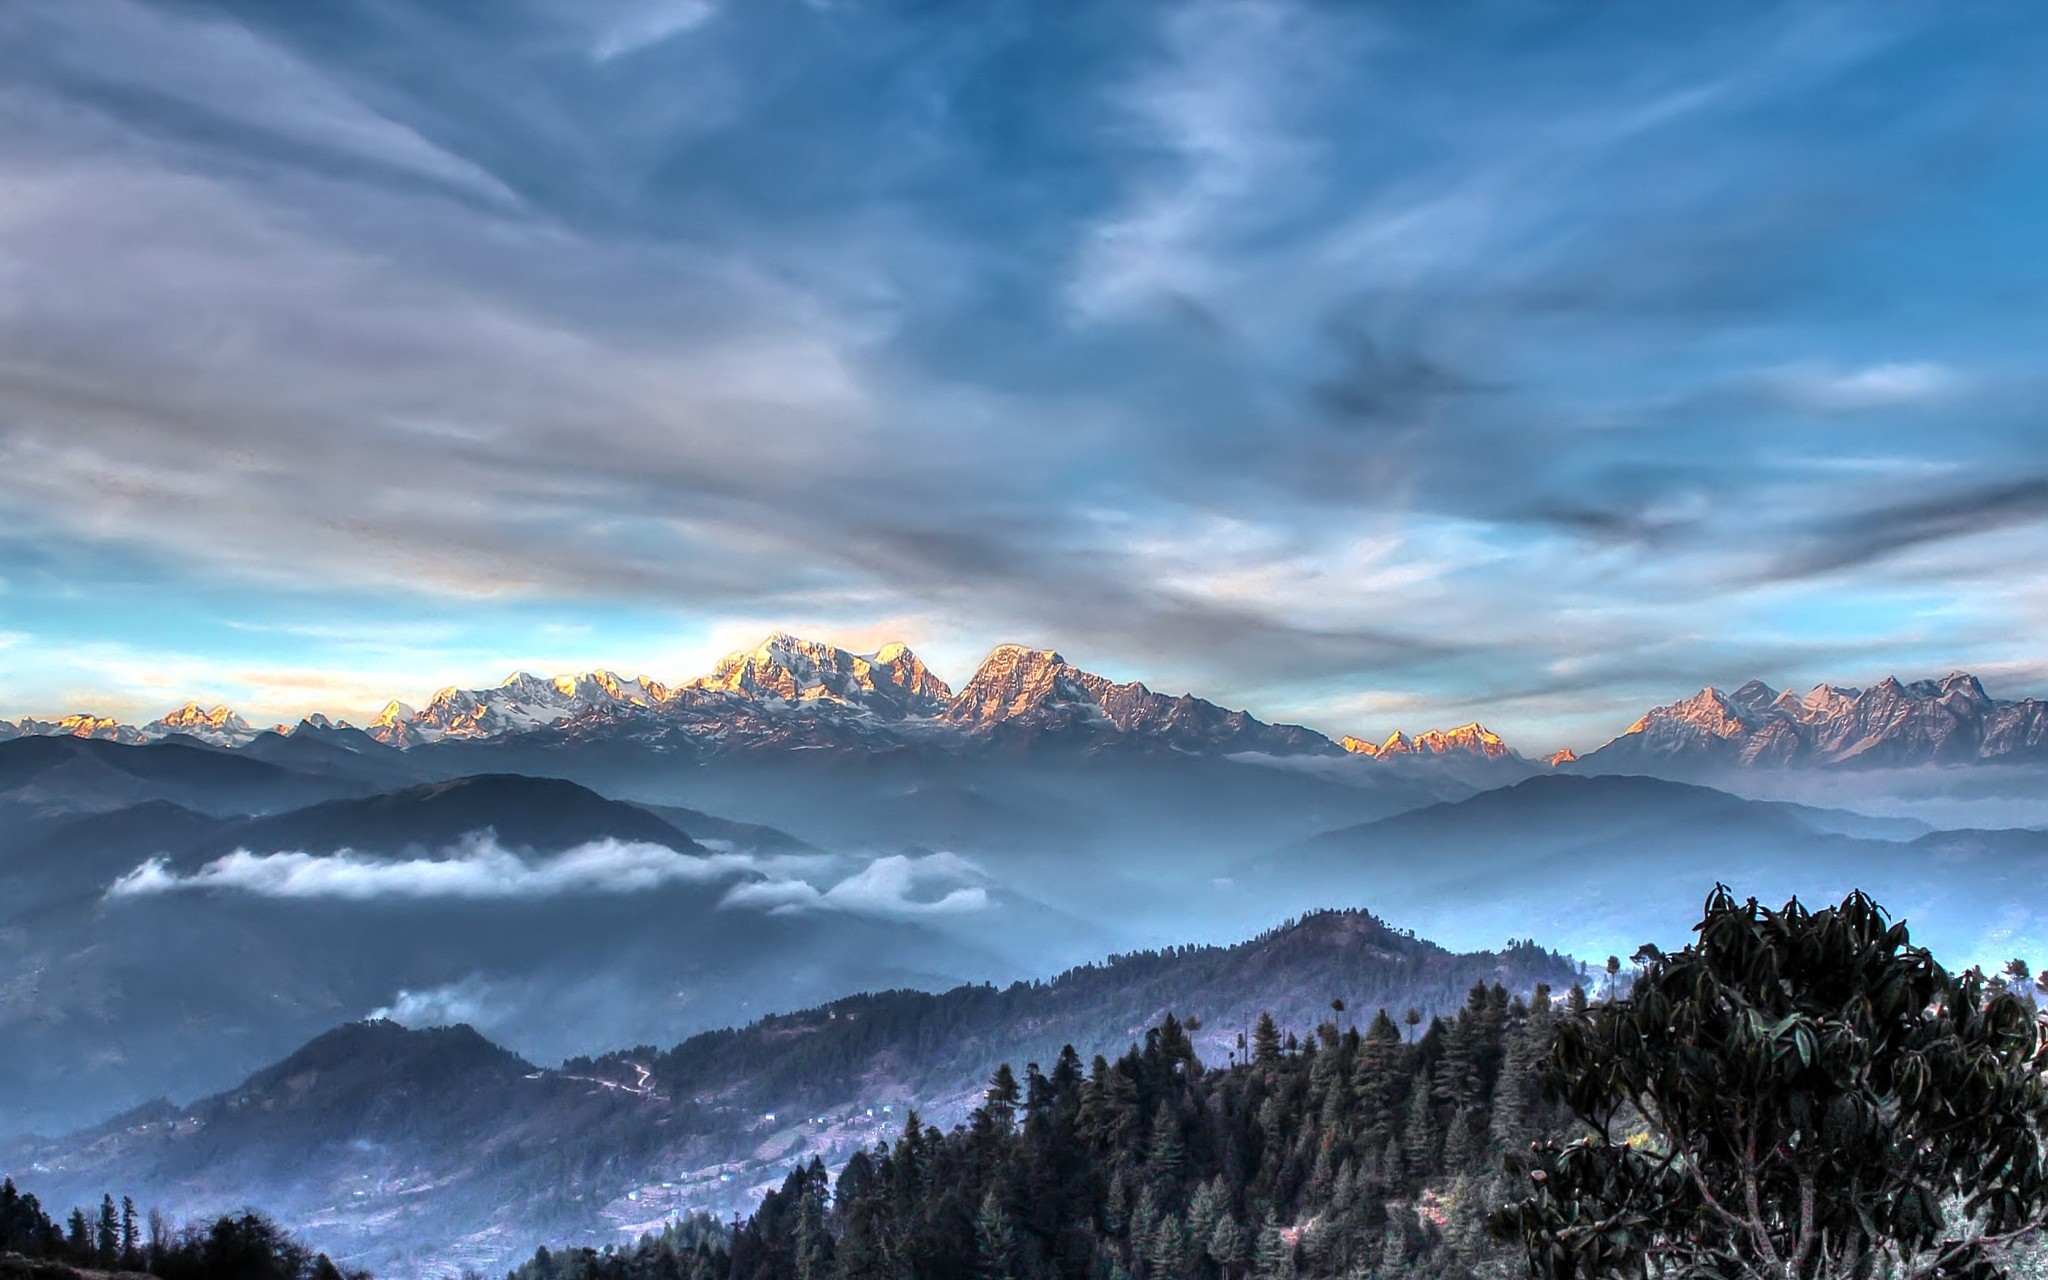 General 2048x1280 landscape nature Himalayas mountains forest snowy peak mist clouds sunset Nepal Asia